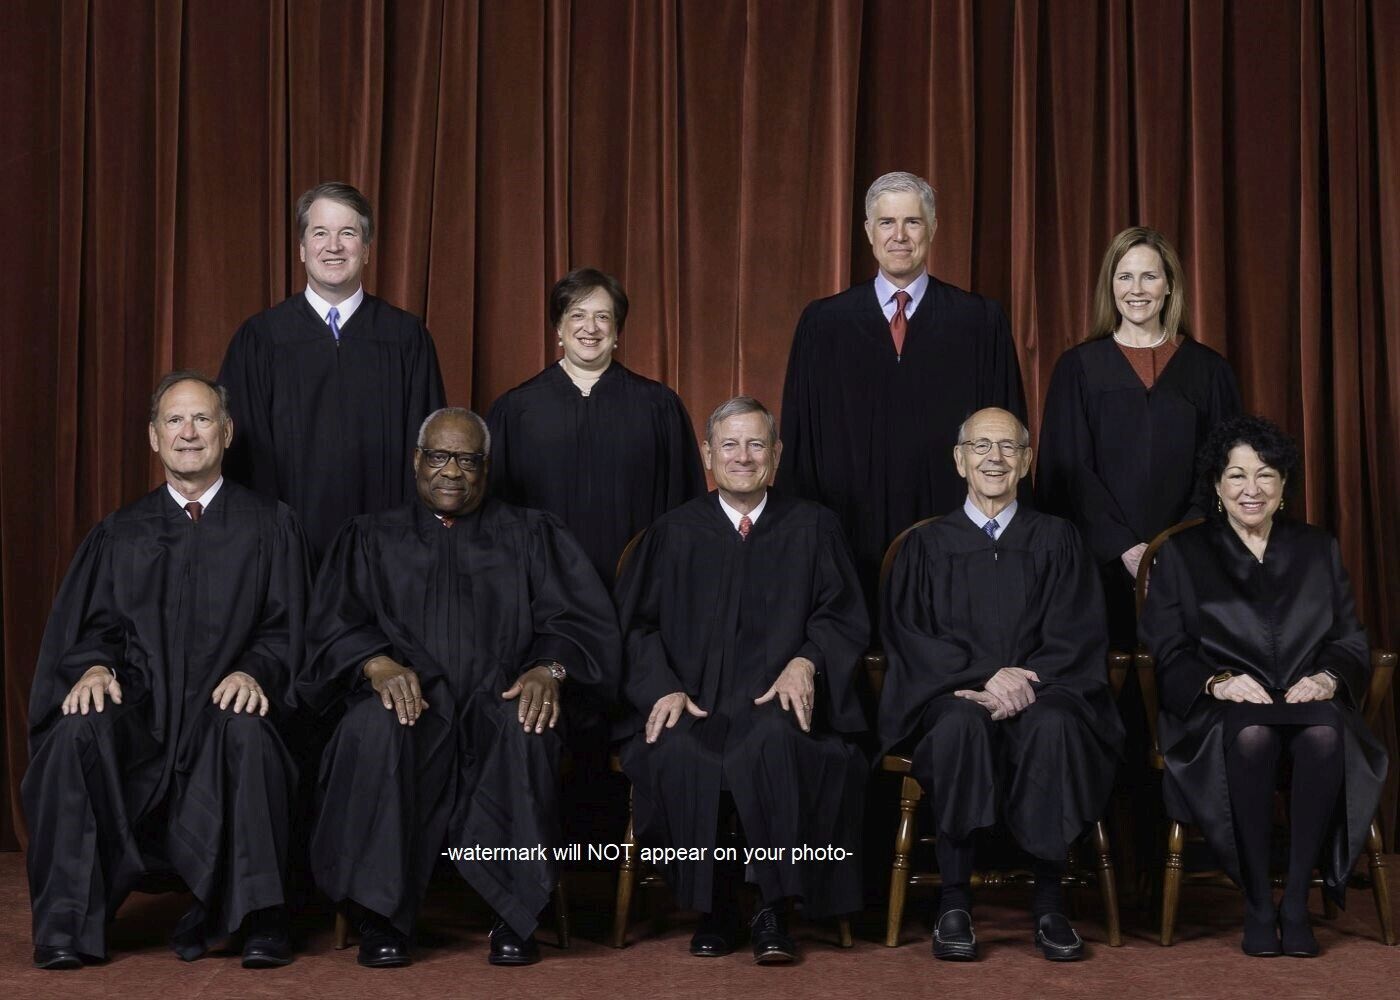 United States Supreme Court PHOTO Roberts Court 2020 Justices